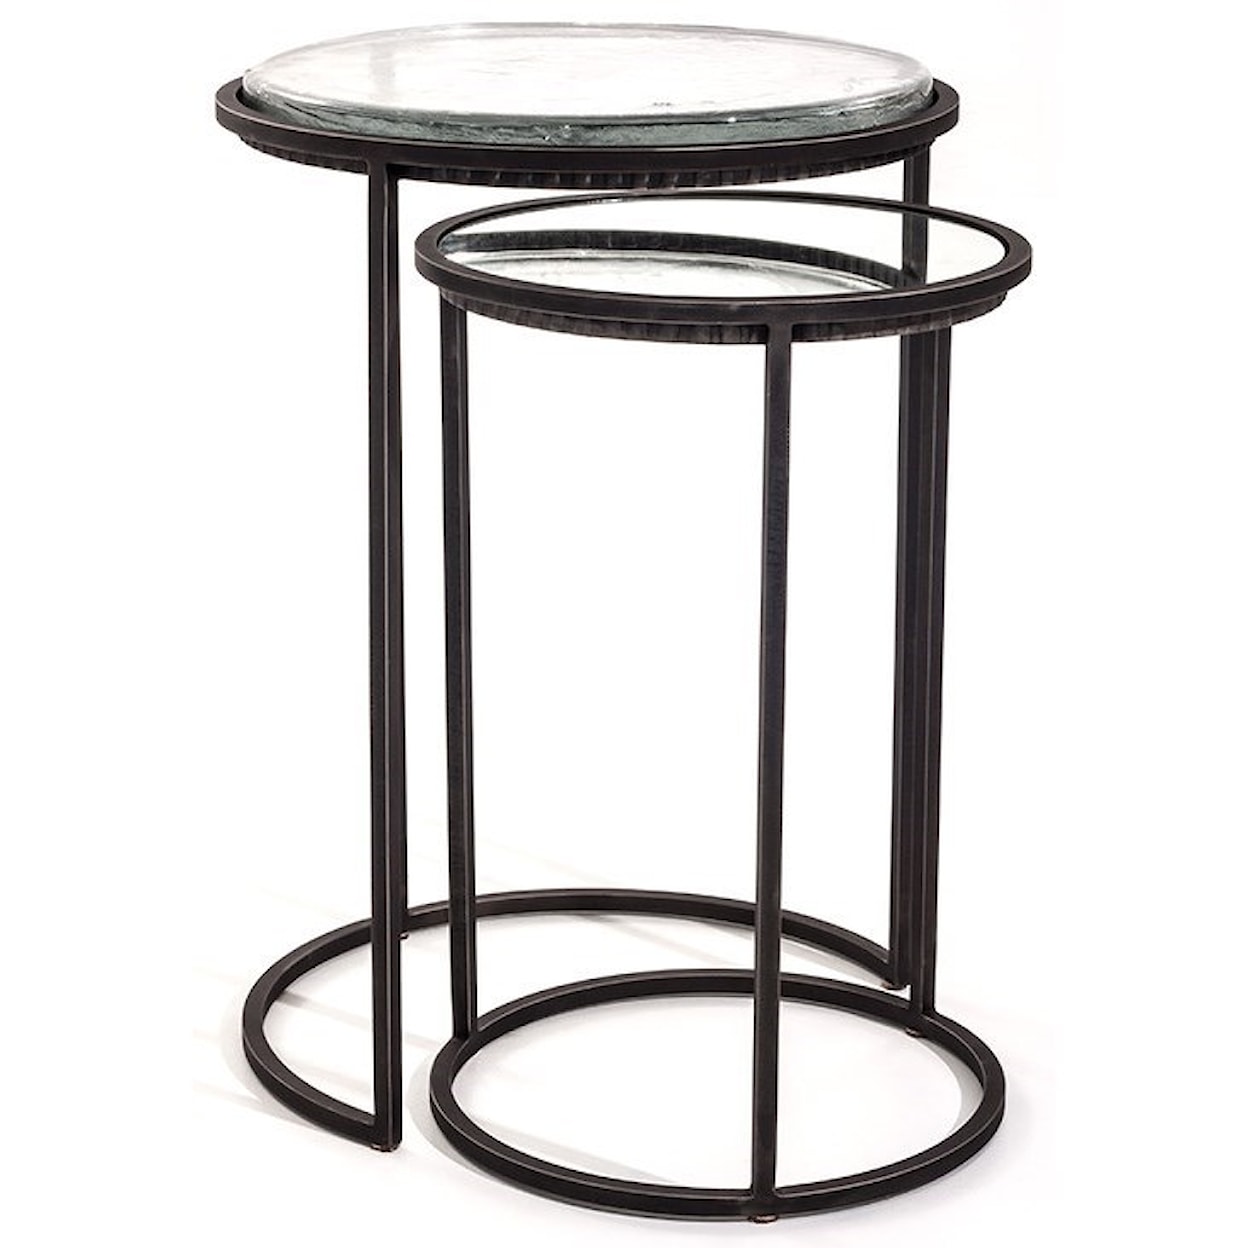 Charleston Forge Dining Room Accents Carolina Nesting Tables